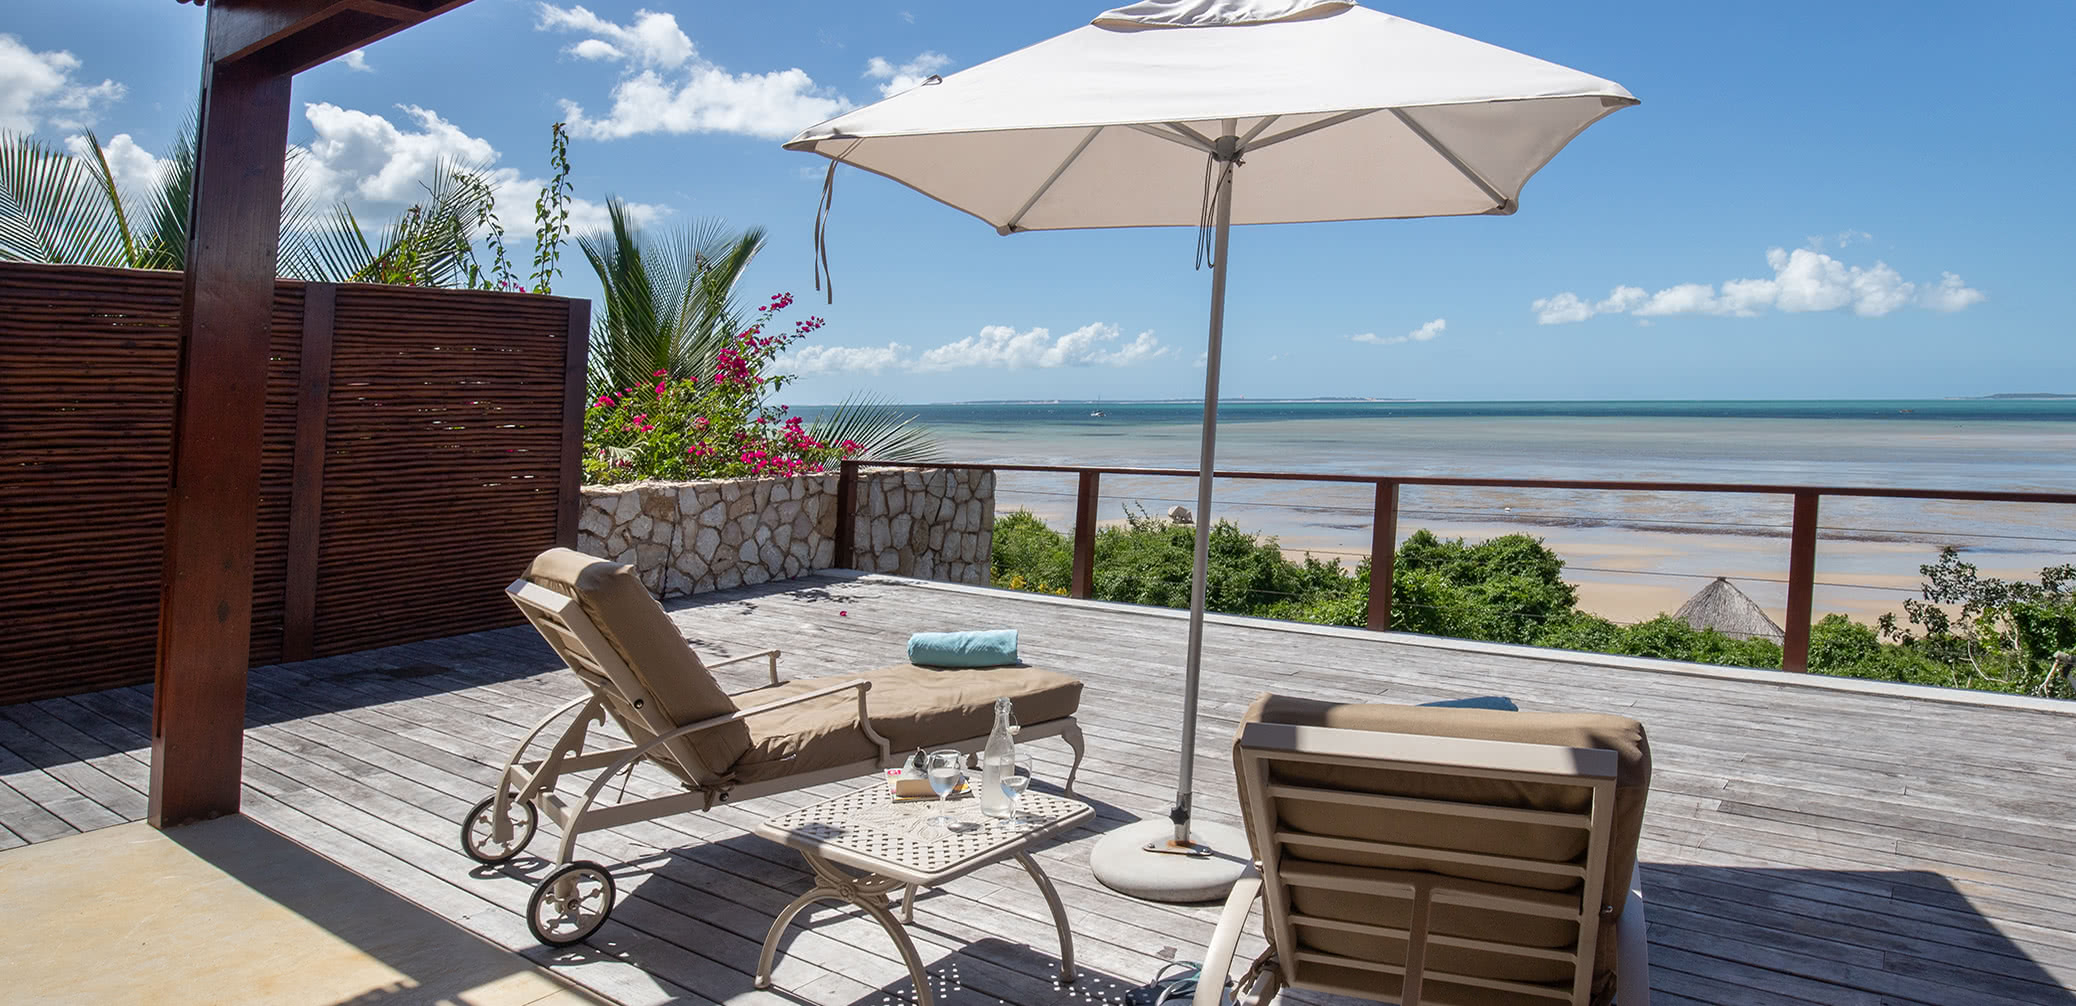 Top 10 Best Luxury Hotels in Mozambique